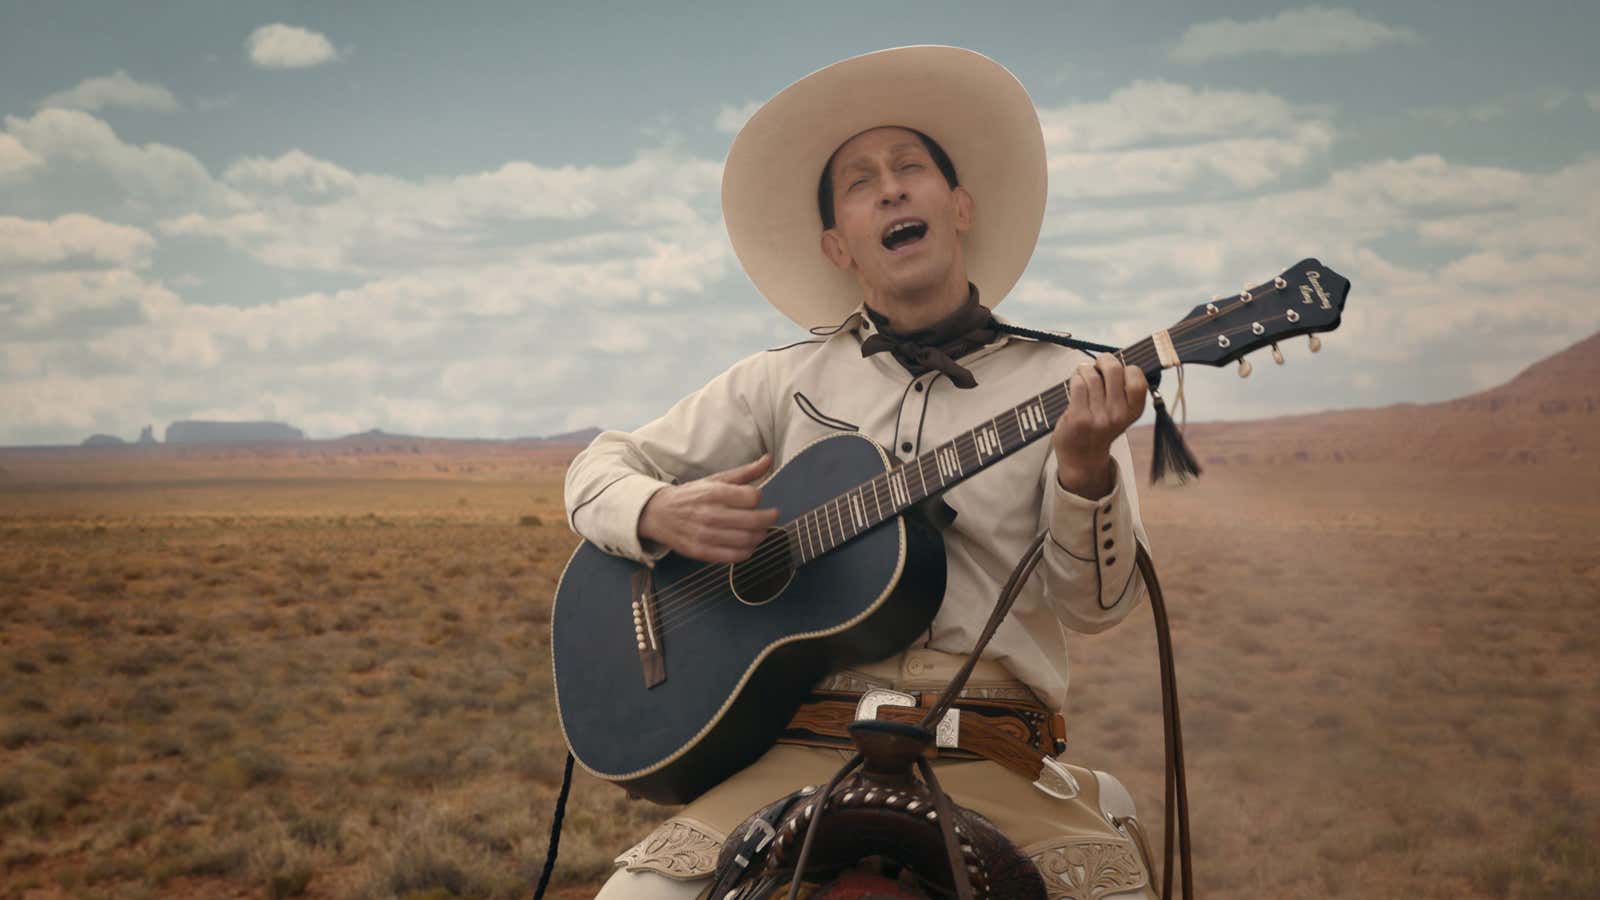 Don’t let his crooning fool you—Buster Scruggs is an agent of death.